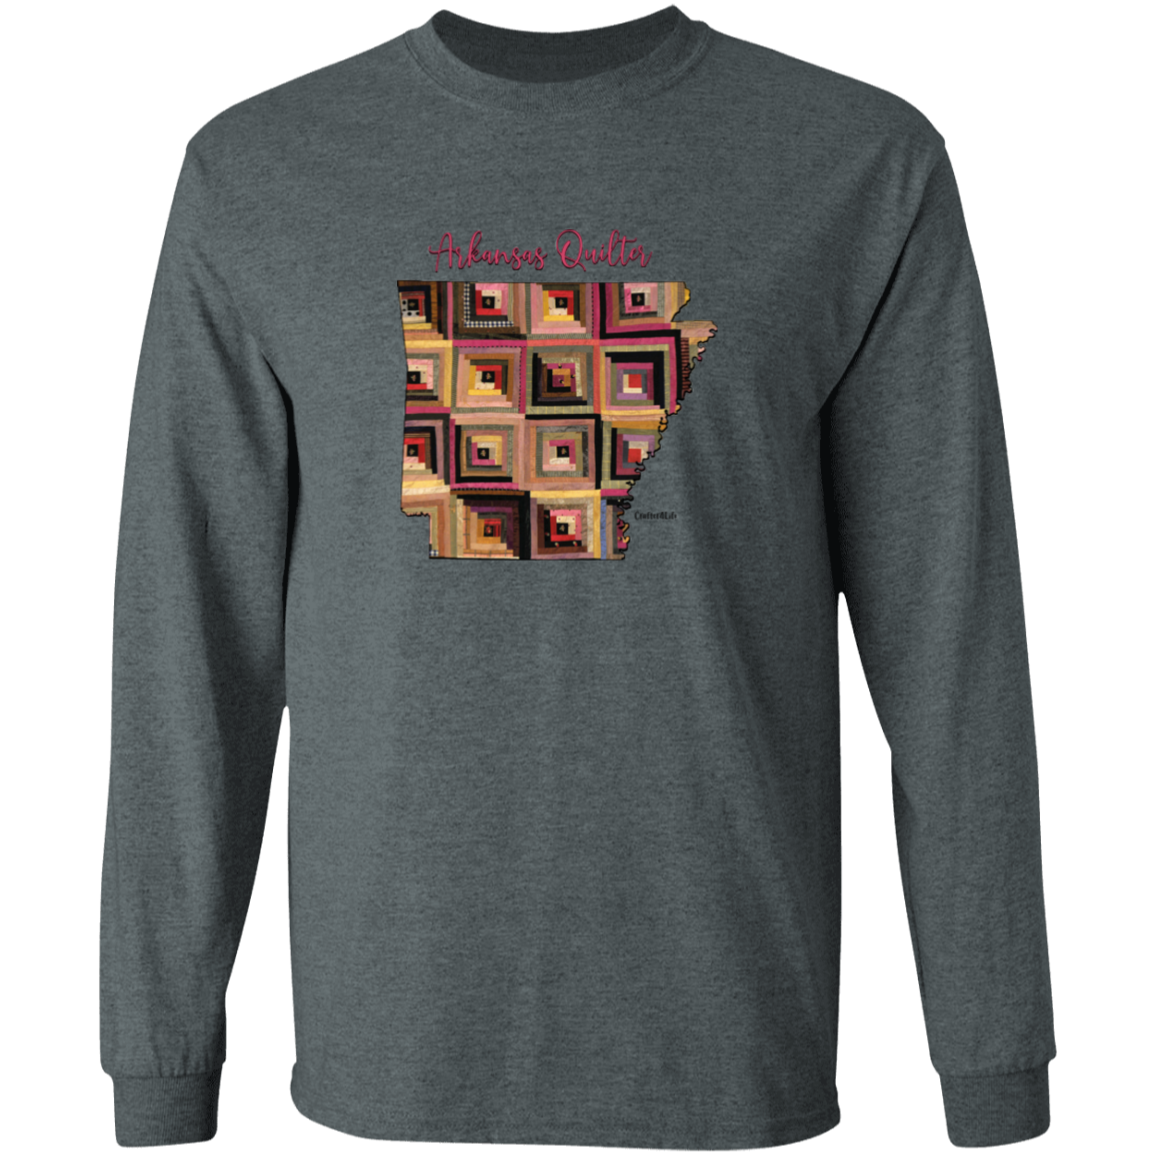 Arkansas Quilter Long Sleeve T-Shirt, Gift for Quilting Friends and Family